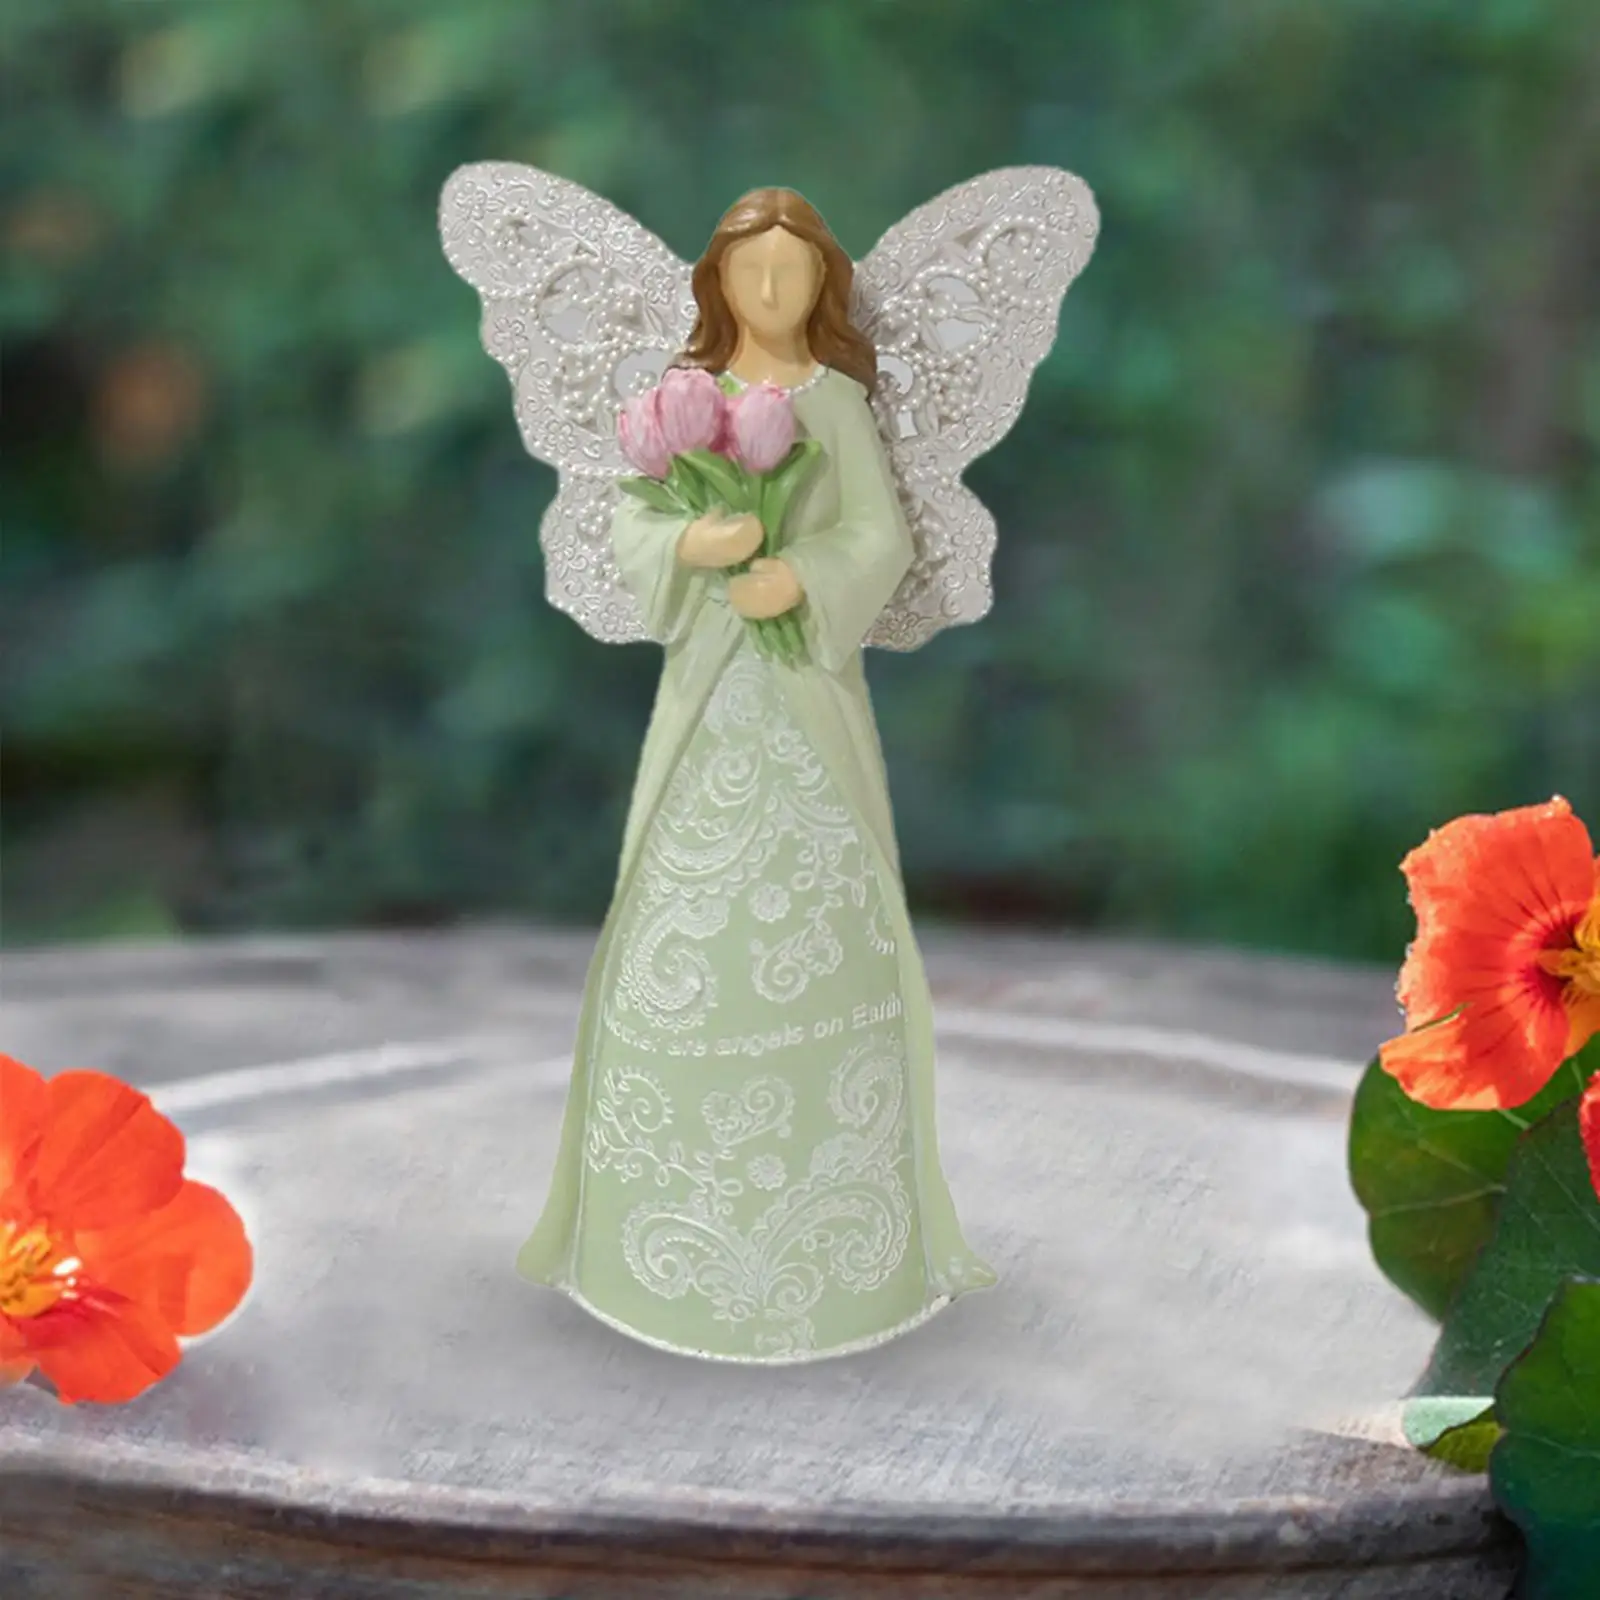 Resin Figurines Sculpture Table Centerpieces Ornament Birthday Gift Wing